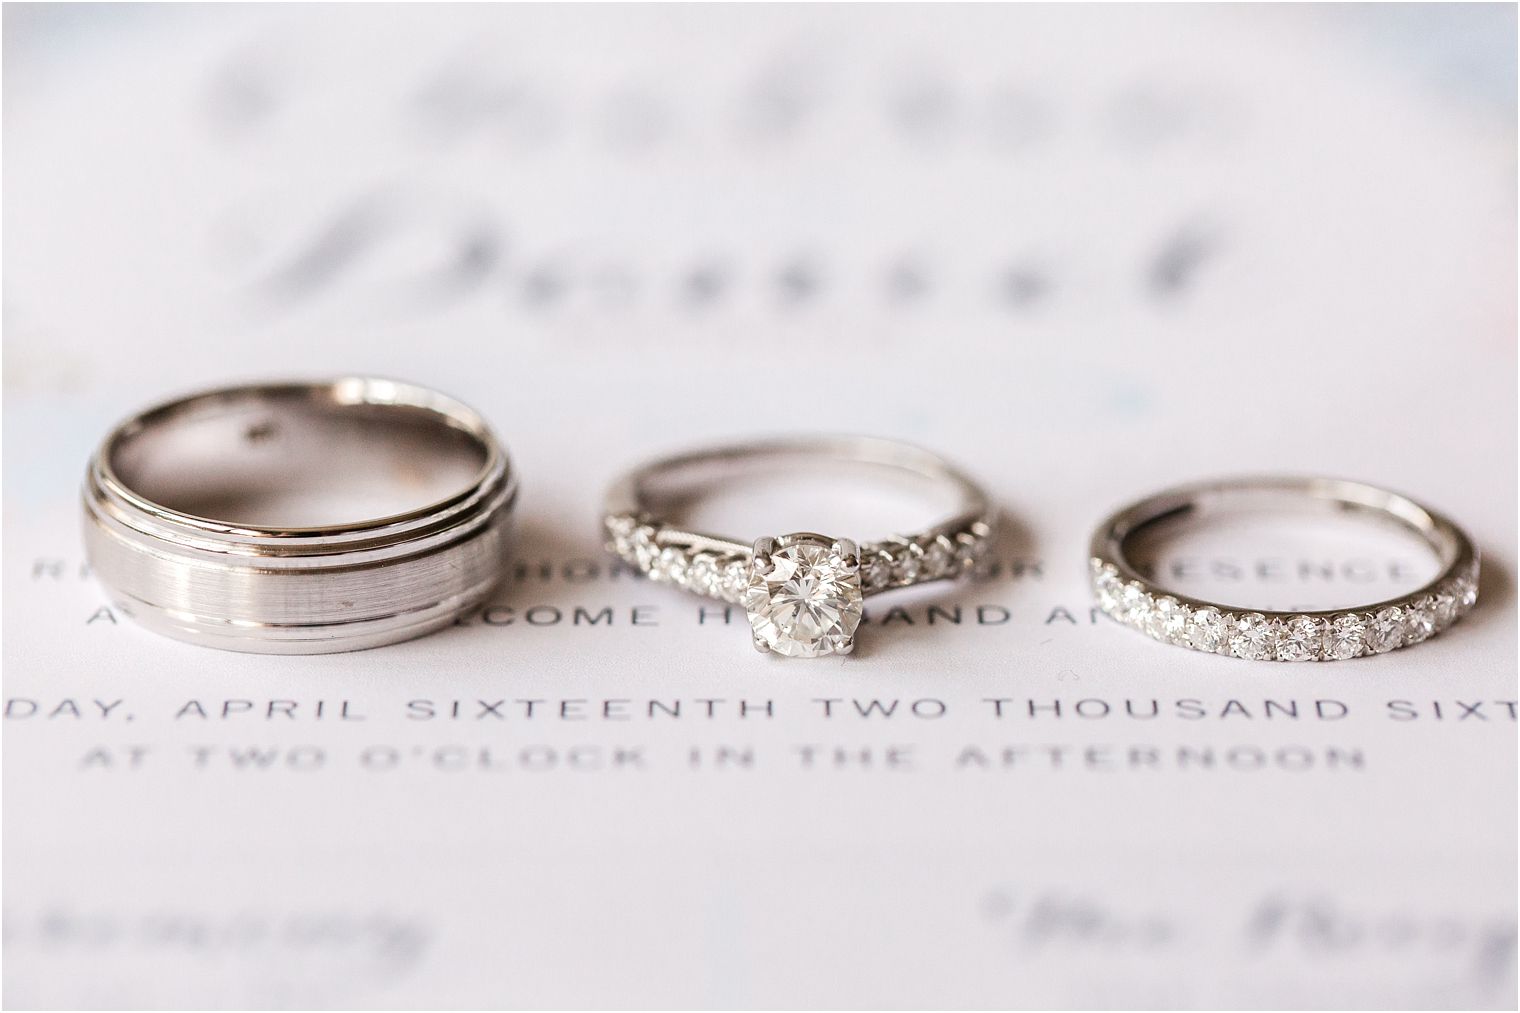 Wedding bands on invitation by Honeybliss Design